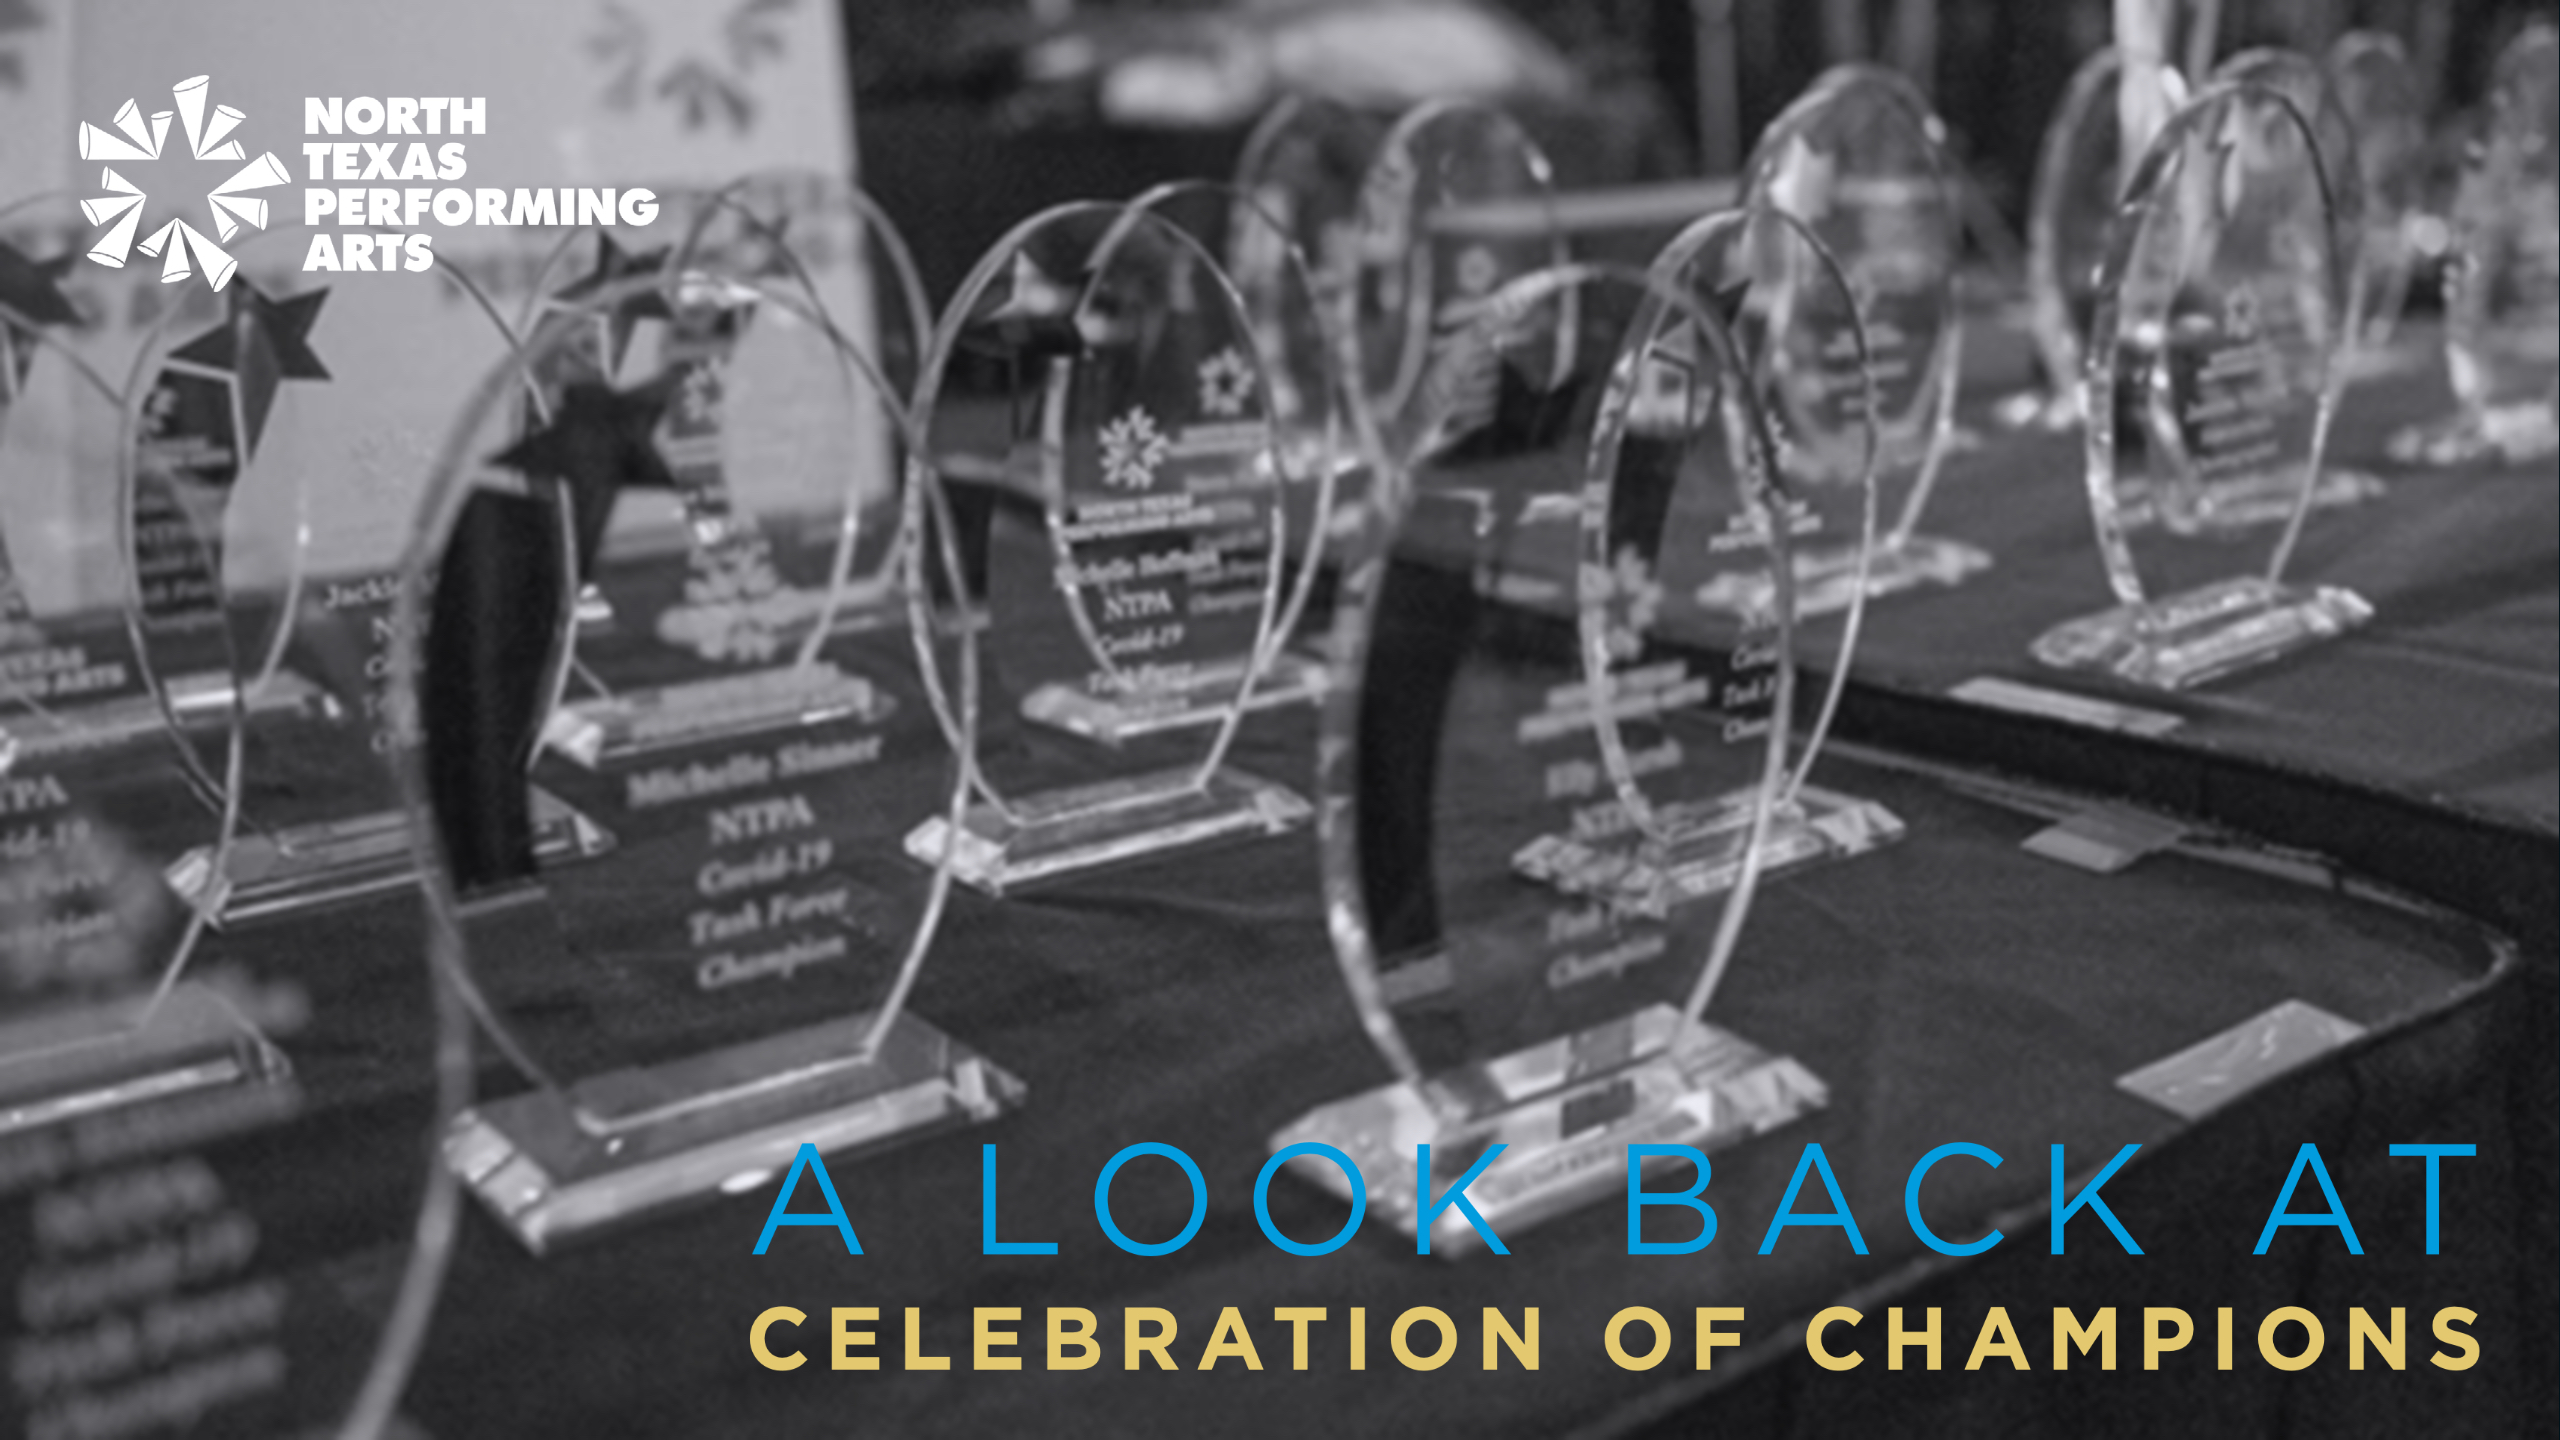 A look back at celebration of champions blog article